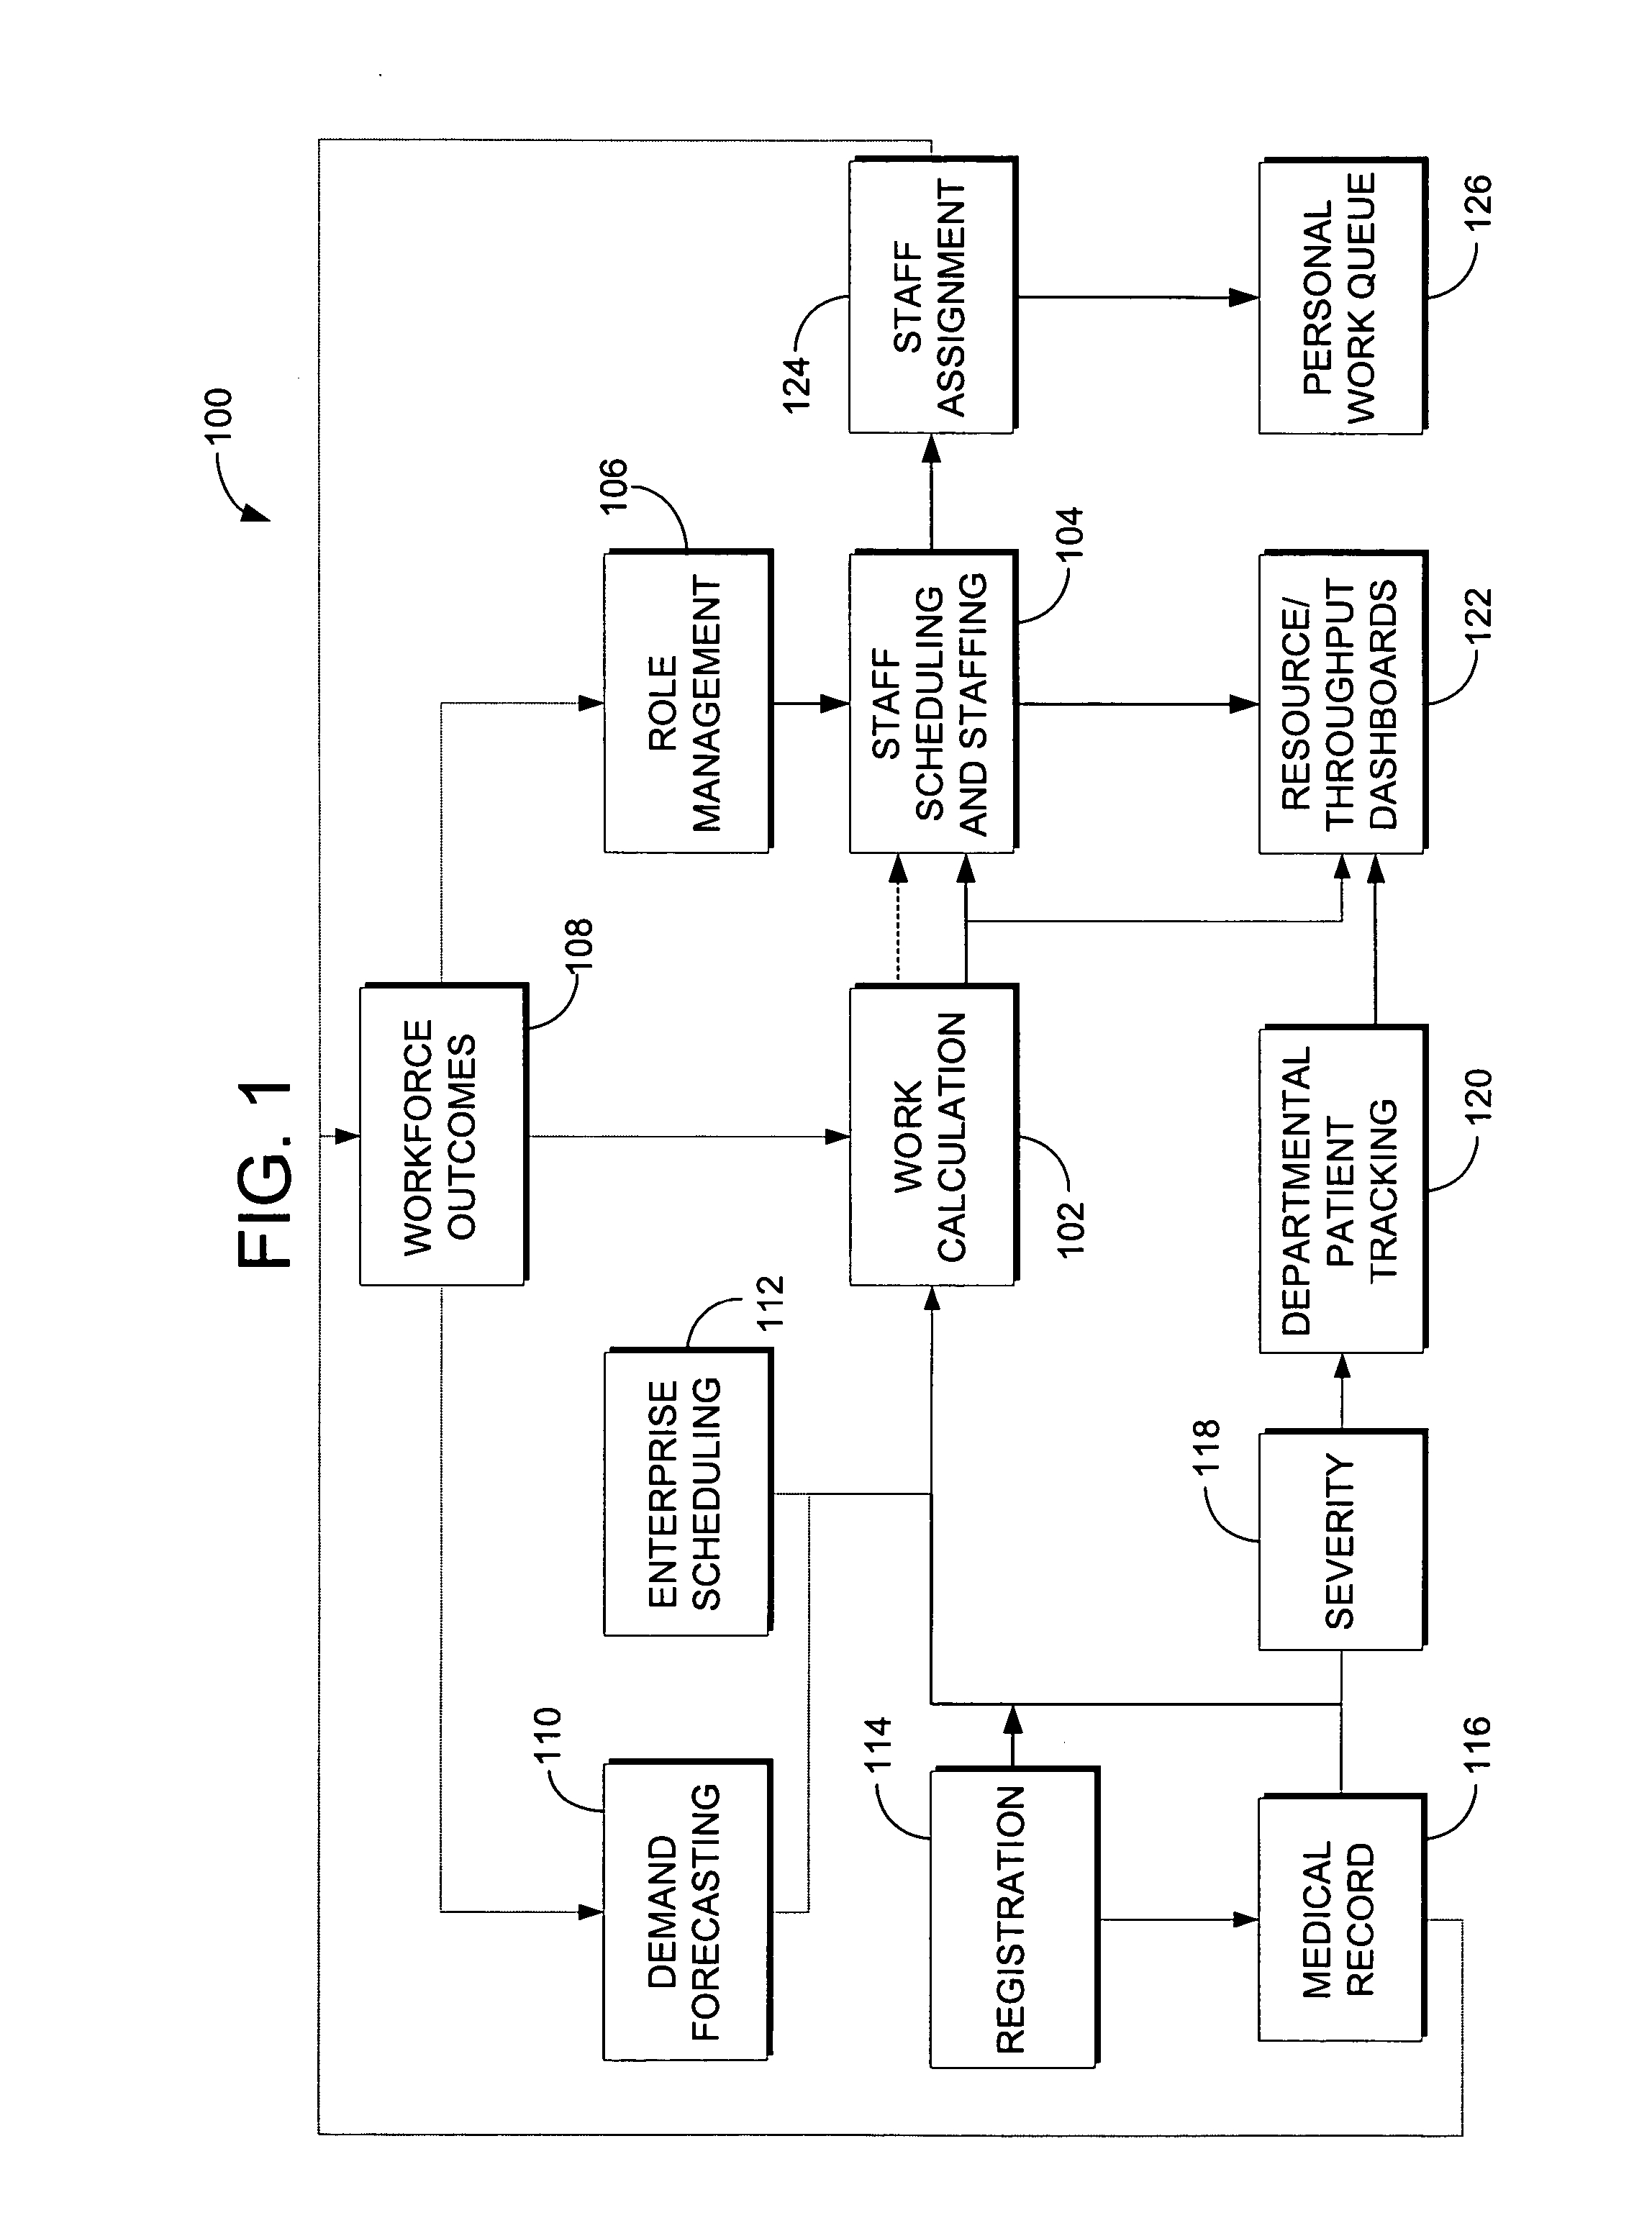 Computerized system and method for determining work in a healthcare environment